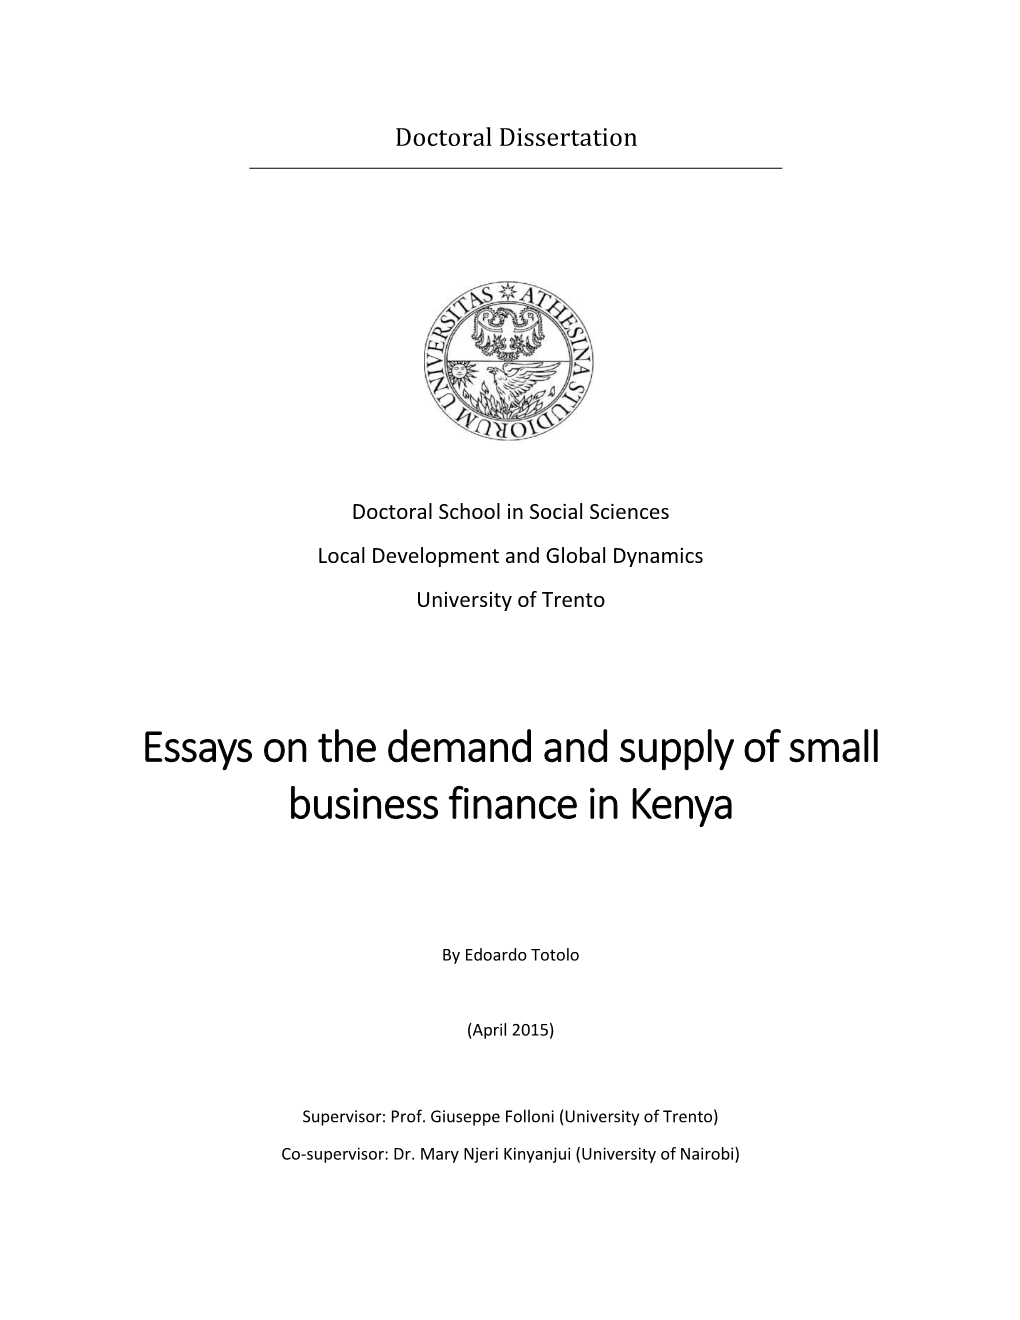 PDF (Essays on the Demand and Supply of Small Business Finance In